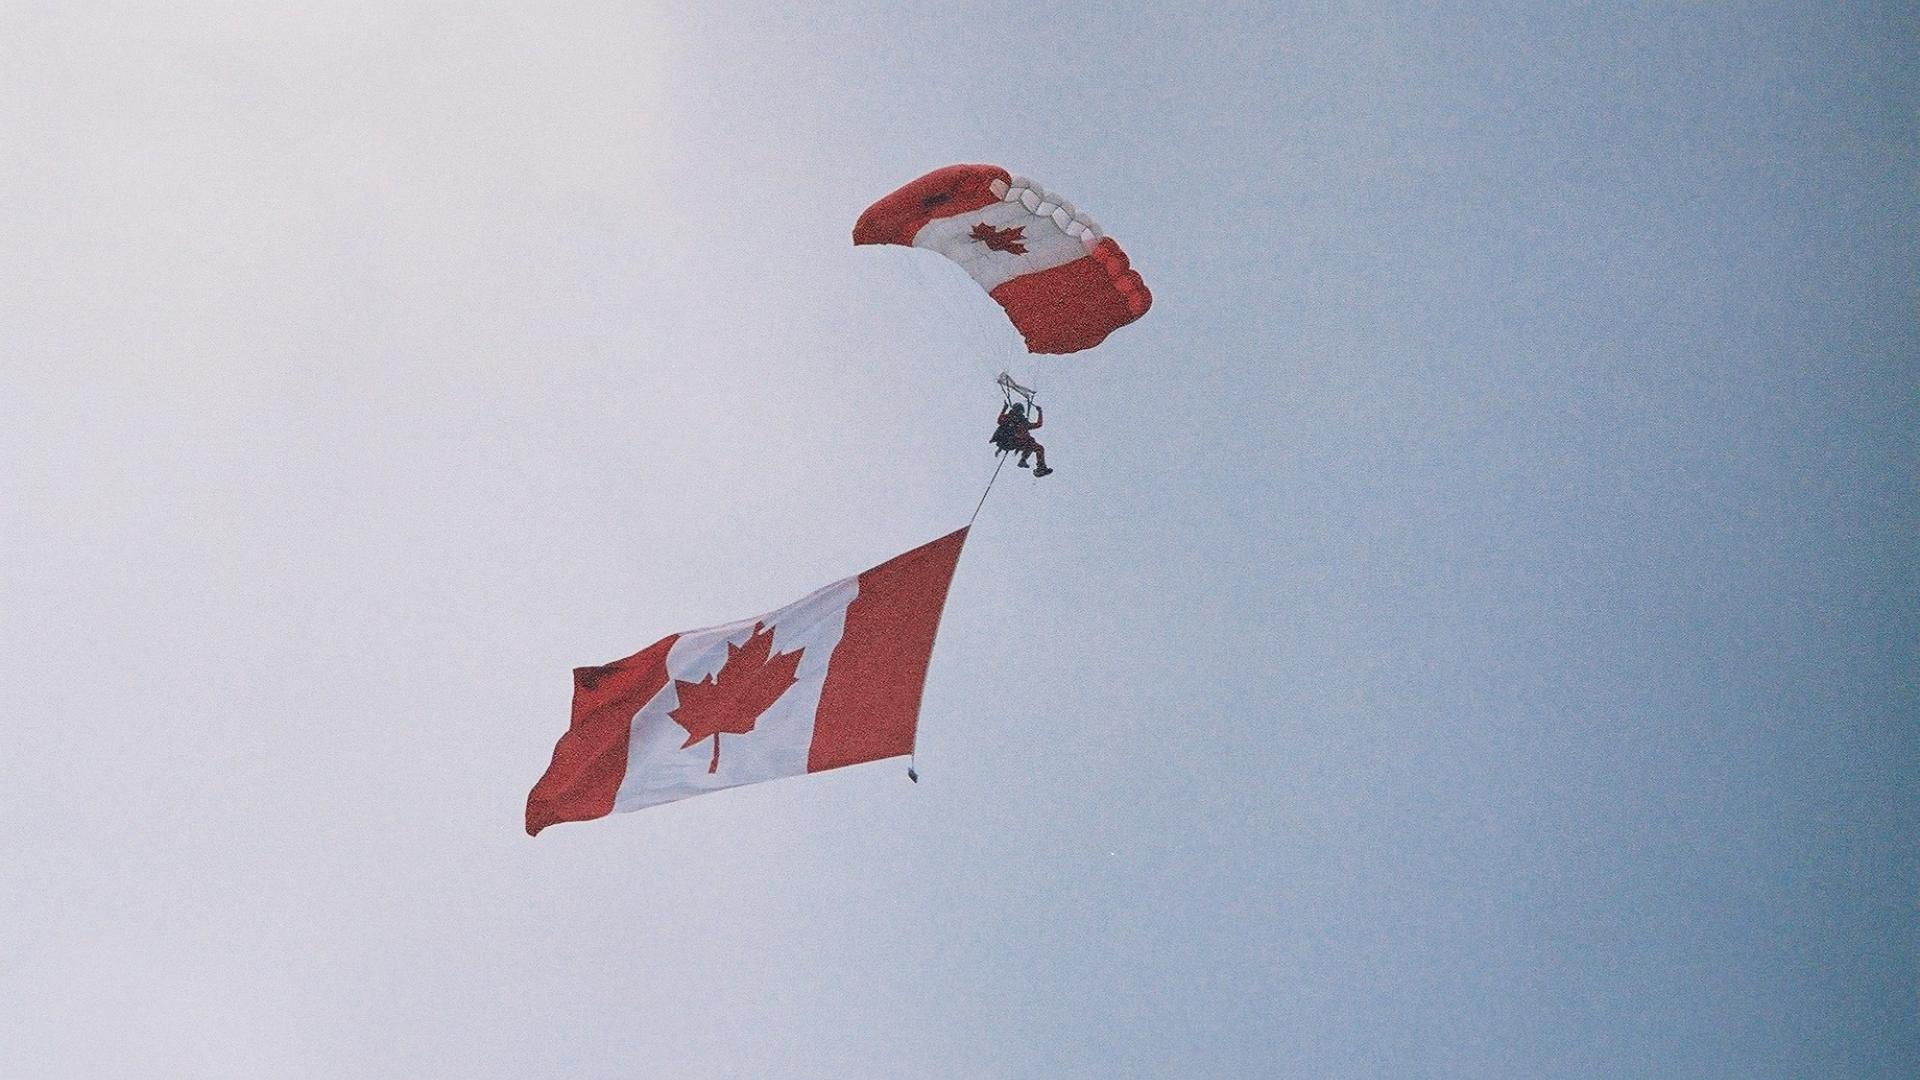 Person parachuting. The parachute has the flag of Canada design. The parachuter is waving the Canadian flag.